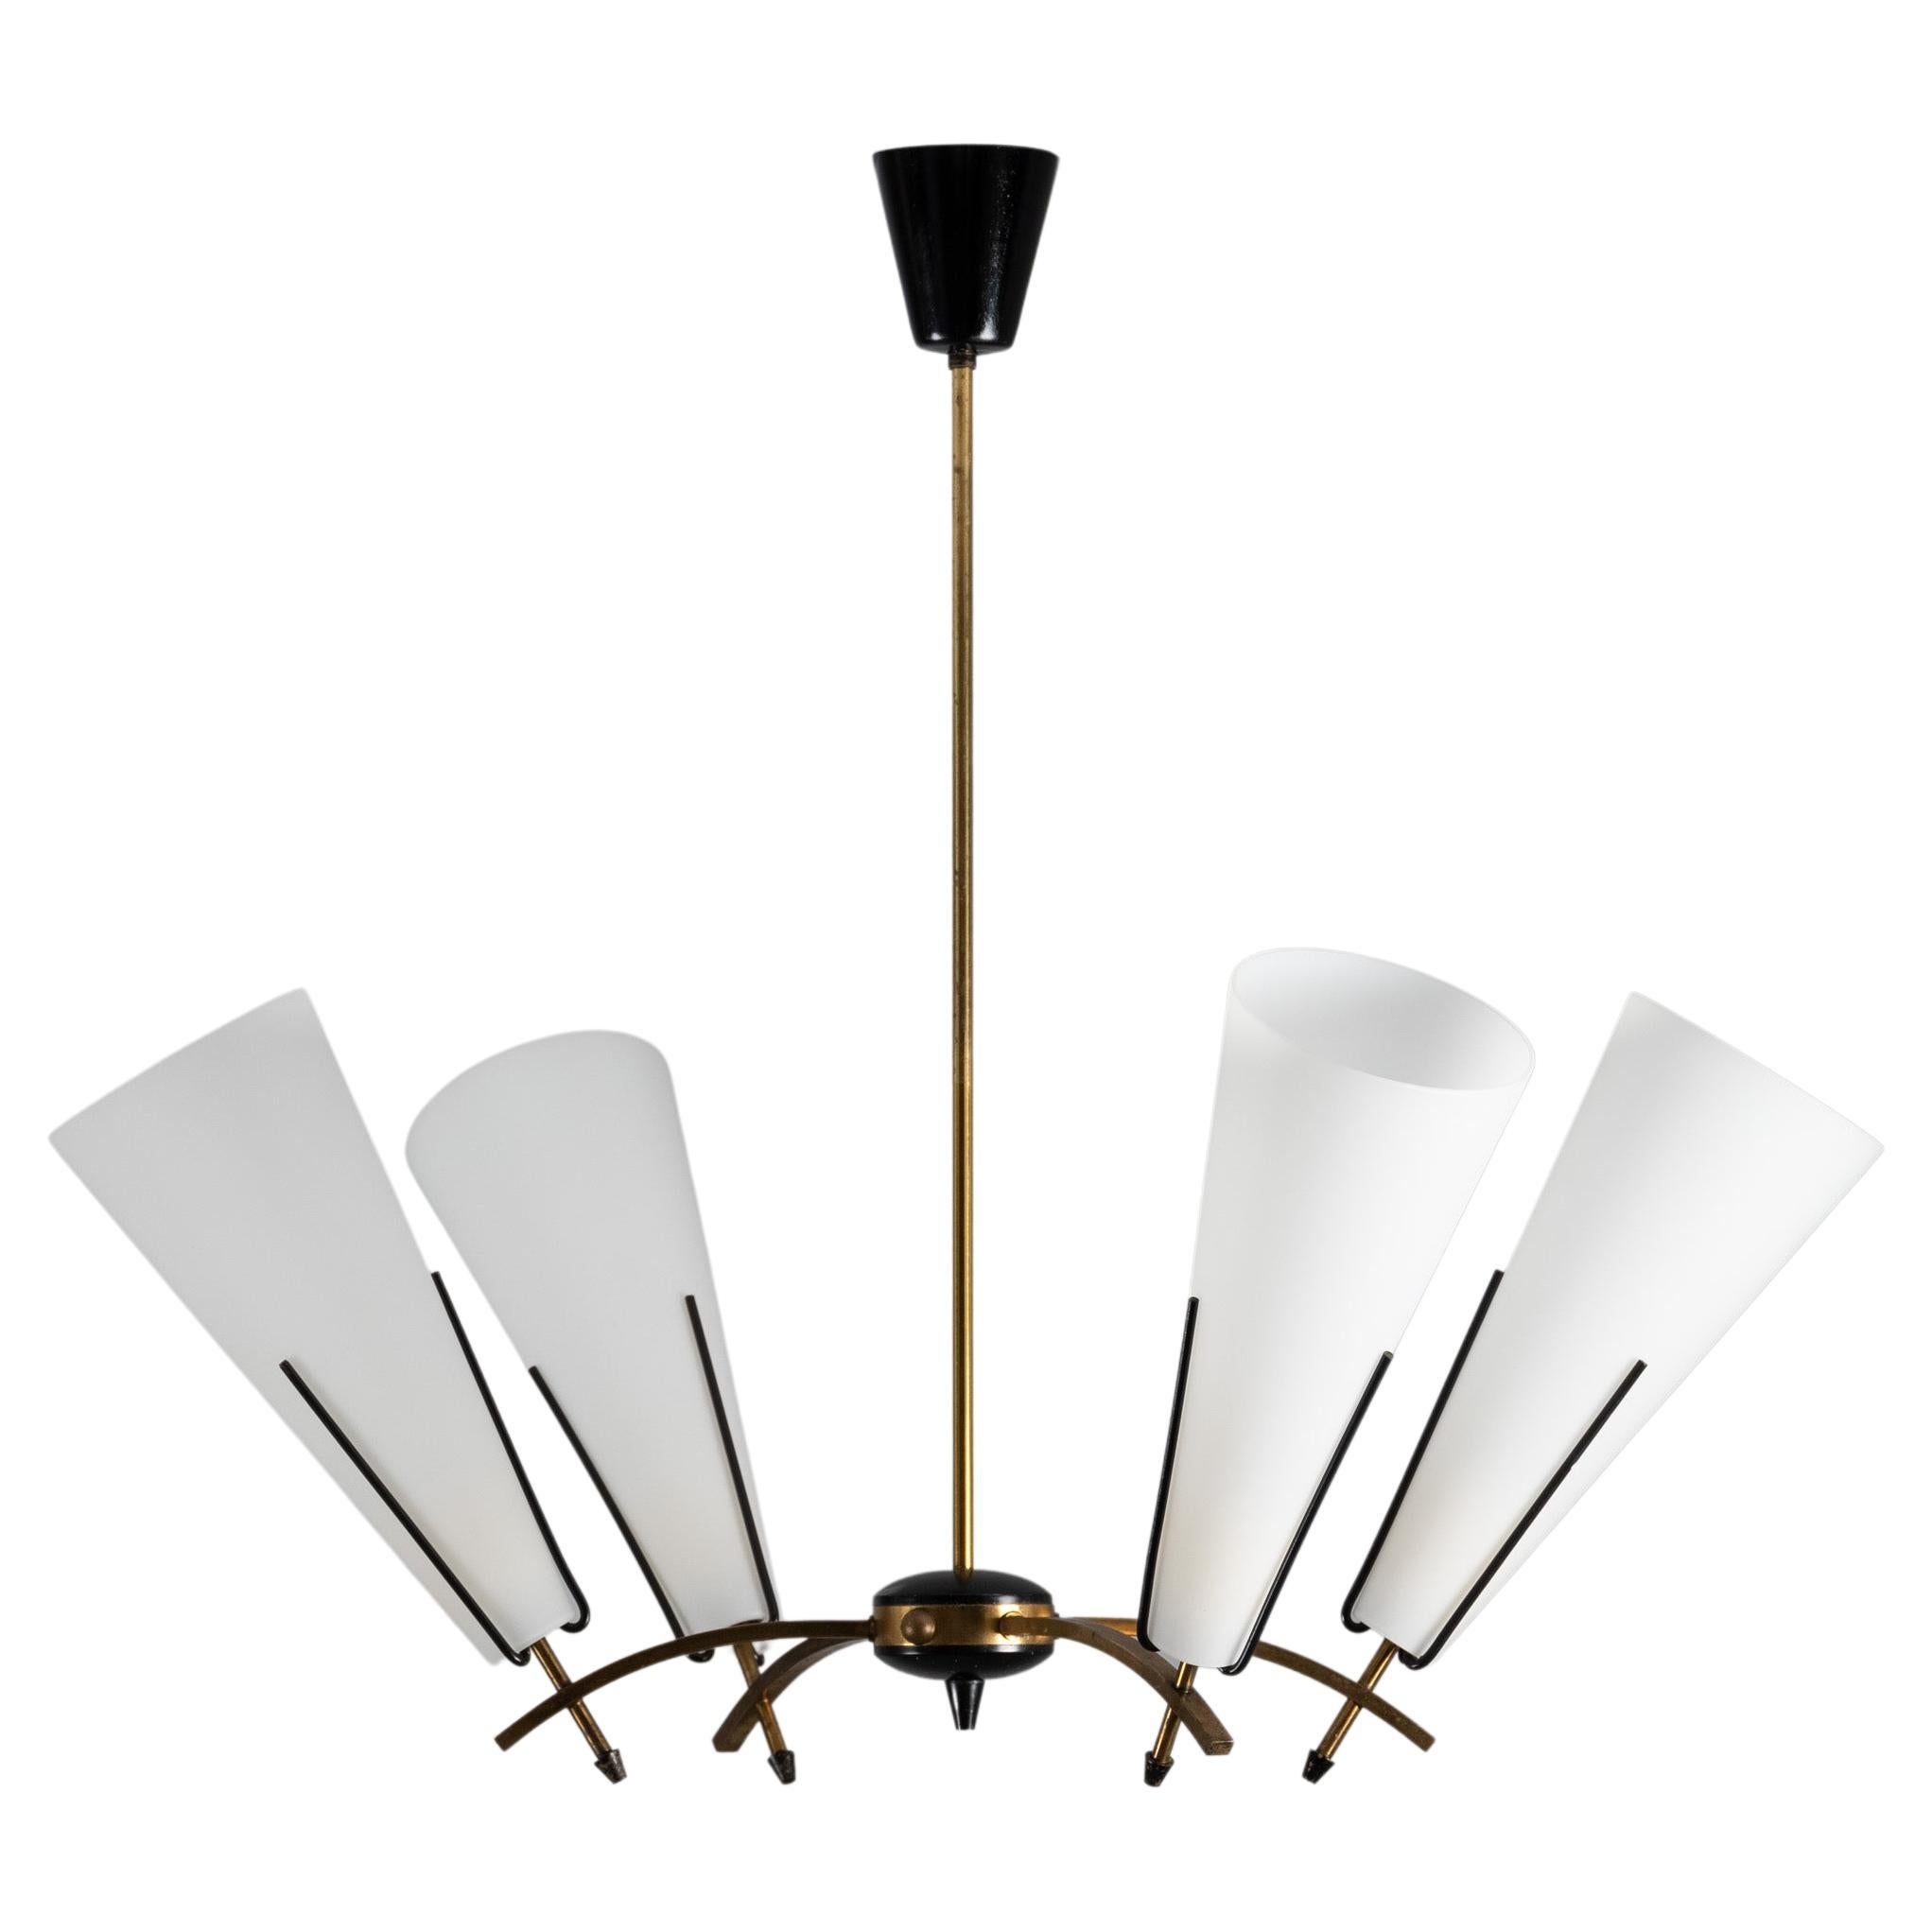 Stilnovo 1950s Chandelier in Brass and 4 Conical Opals, Vintage Italian Design For Sale